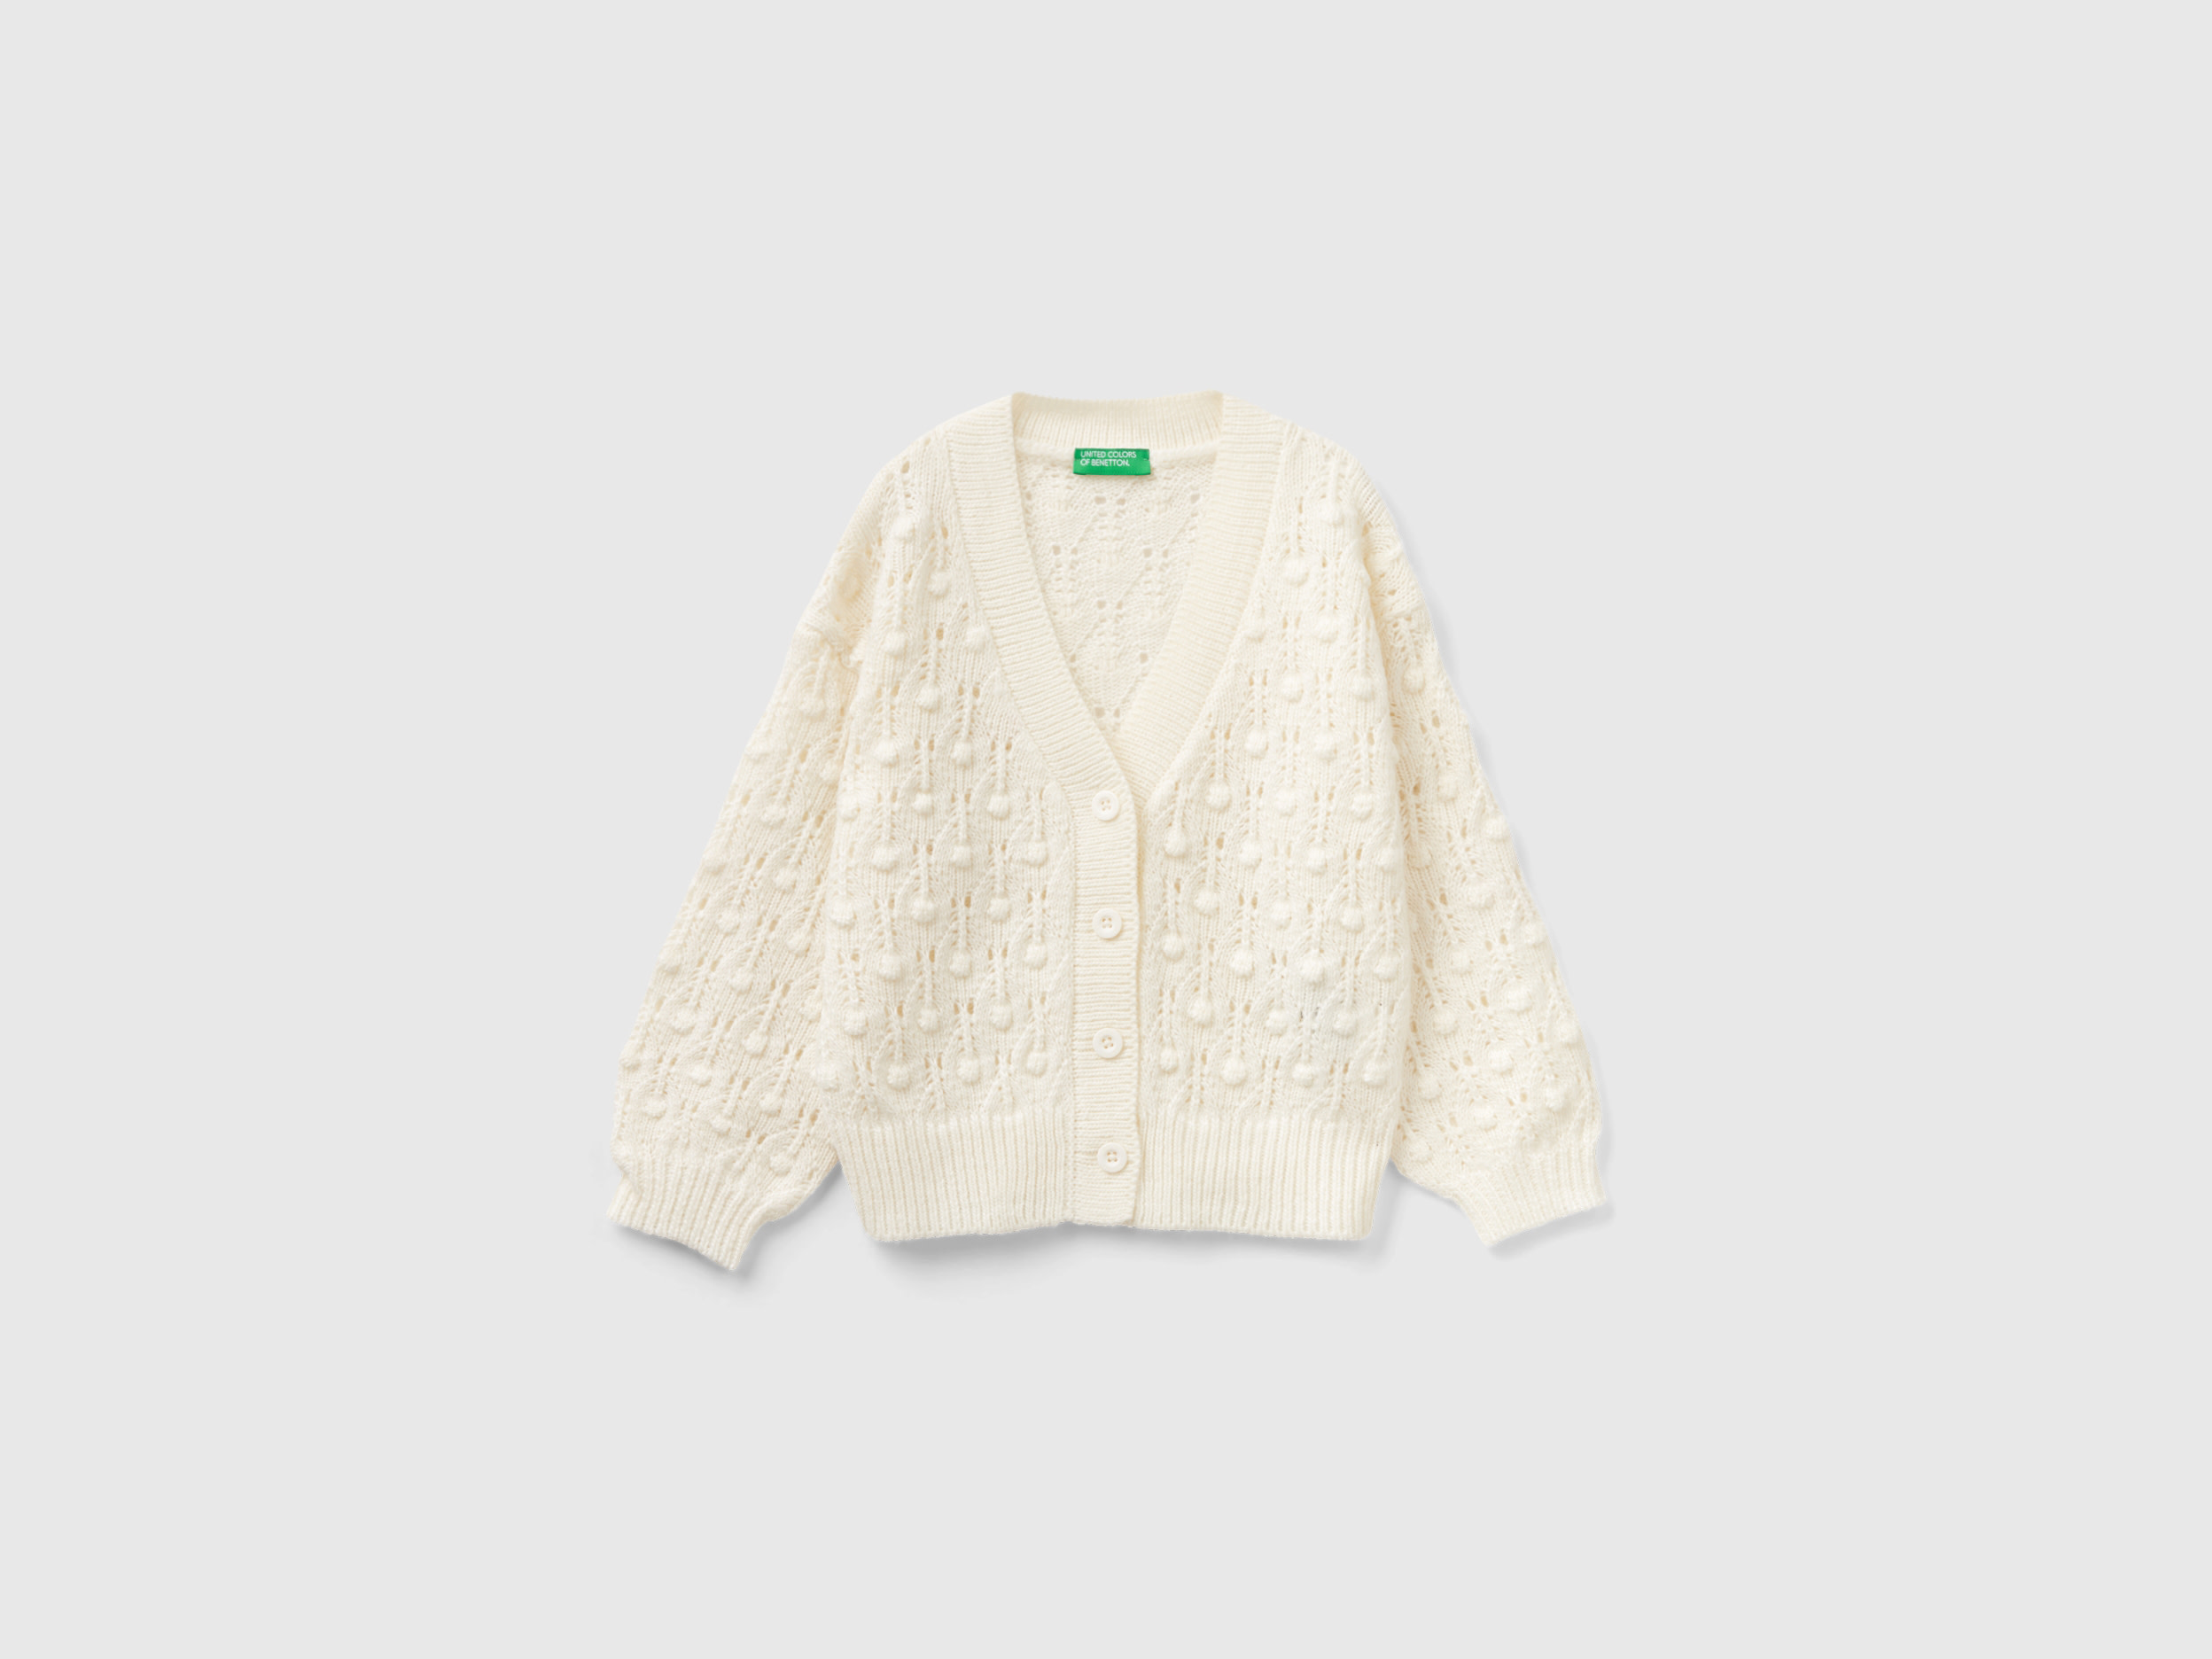 Benetton, Knit Cardigan With Buttons, size 2-3, White, Kids